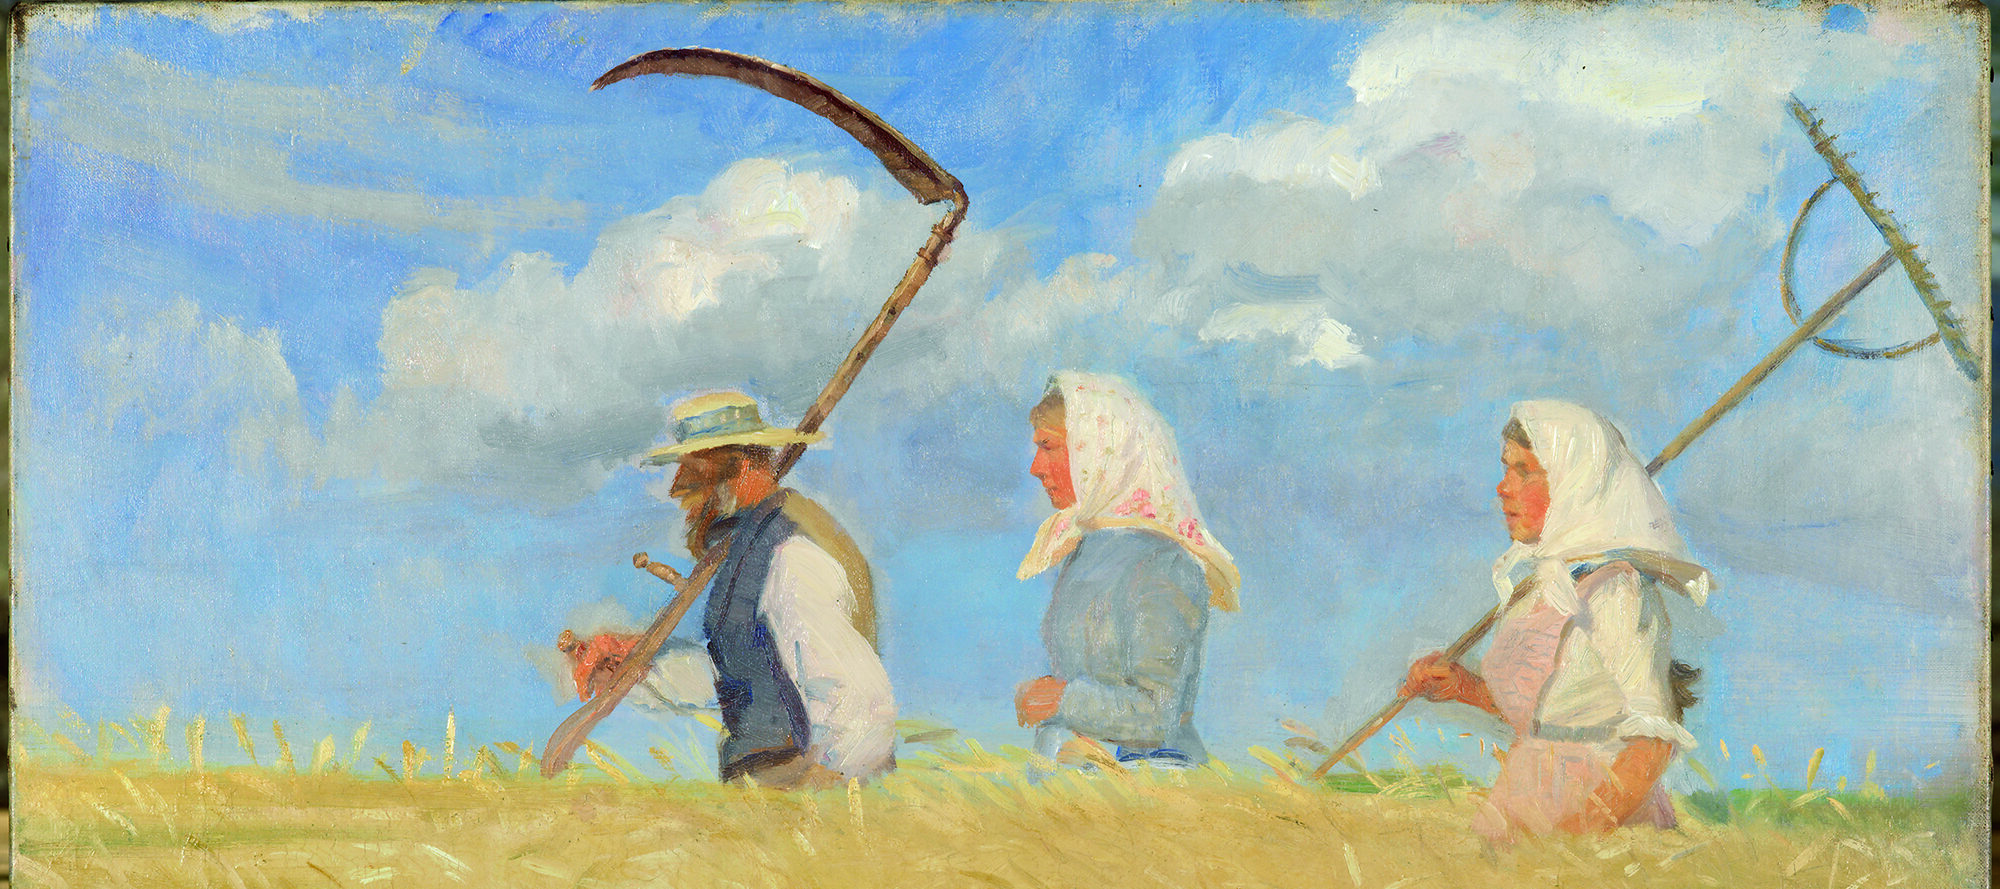 Expressionist painting of a man and two women wearing white headscarves walking through a waist-high wheat field. The man and the woman following in the back carry scythes to cut the wheat.